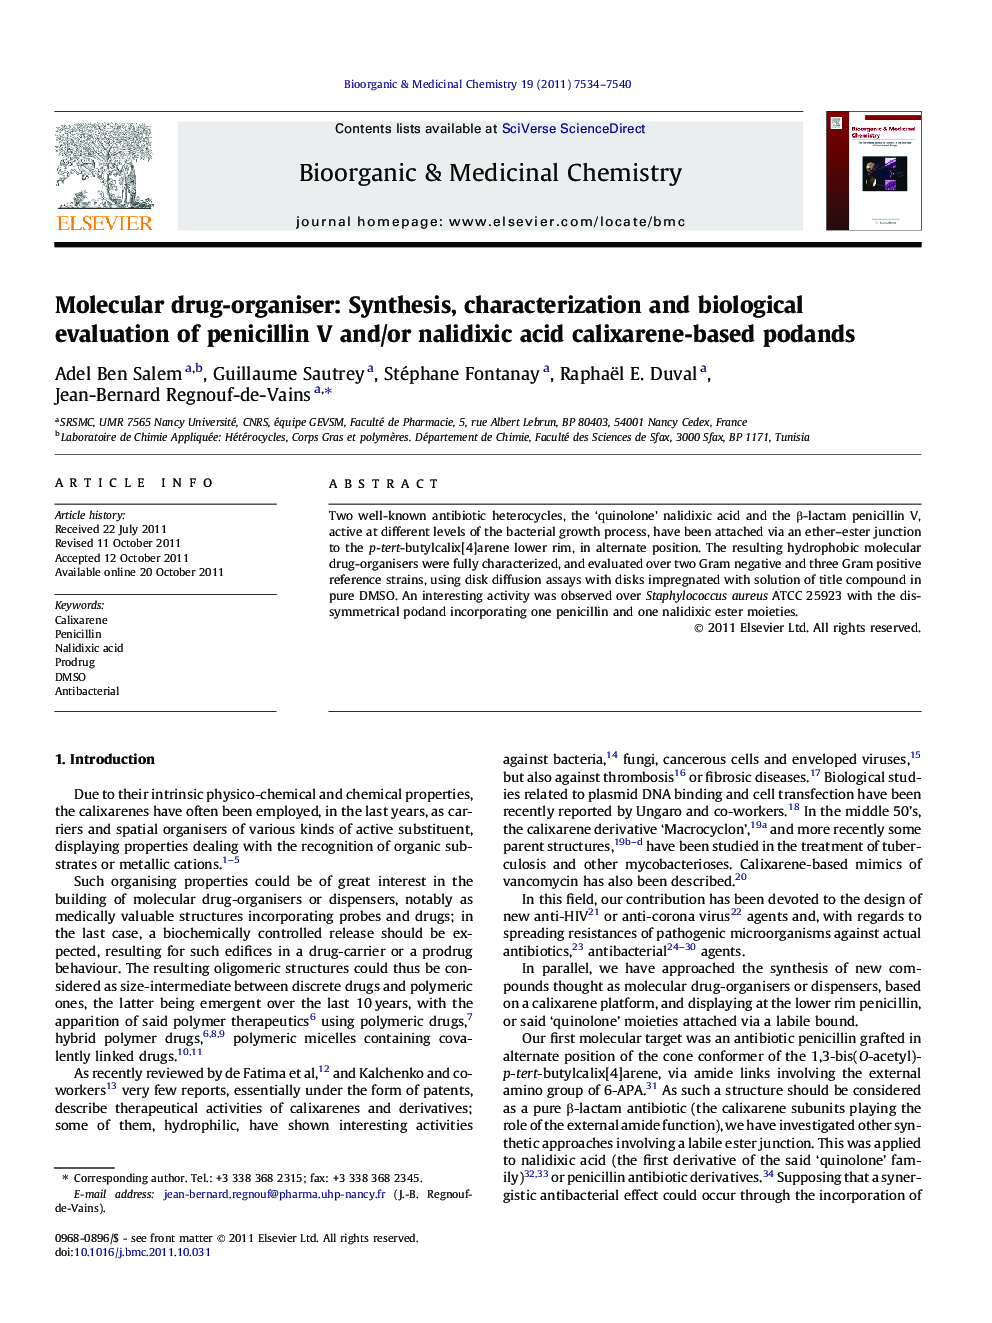 Molecular drug-organiser: Synthesis, characterization and biological evaluation of penicillin V and/or nalidixic acid calixarene-based podands